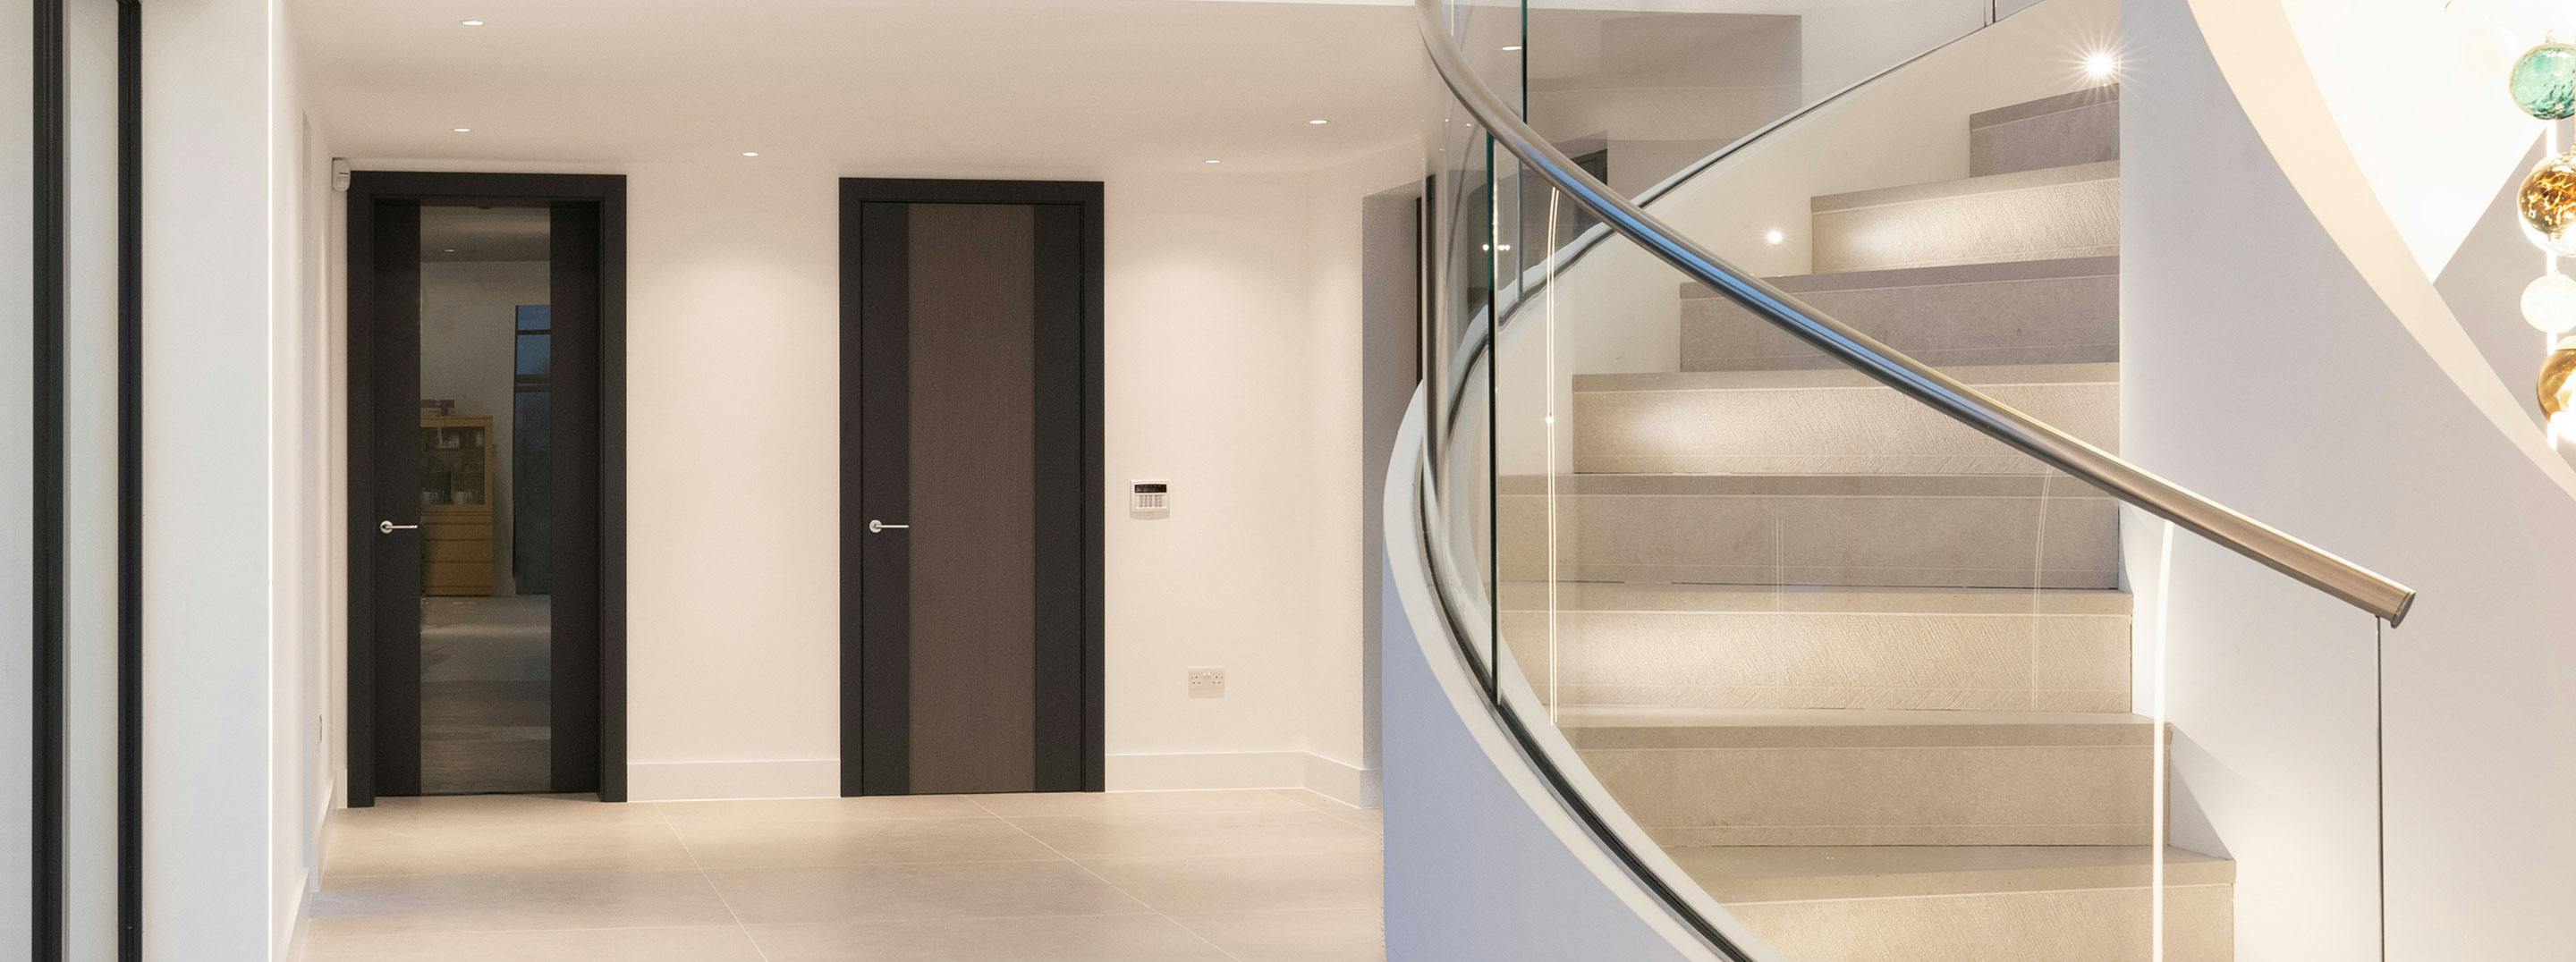 Contemporary hallway and spiral staircase, with two Deuren made-to-measure internal doors - styles include Linea and Trem Glazed in a dark grey painted finish.